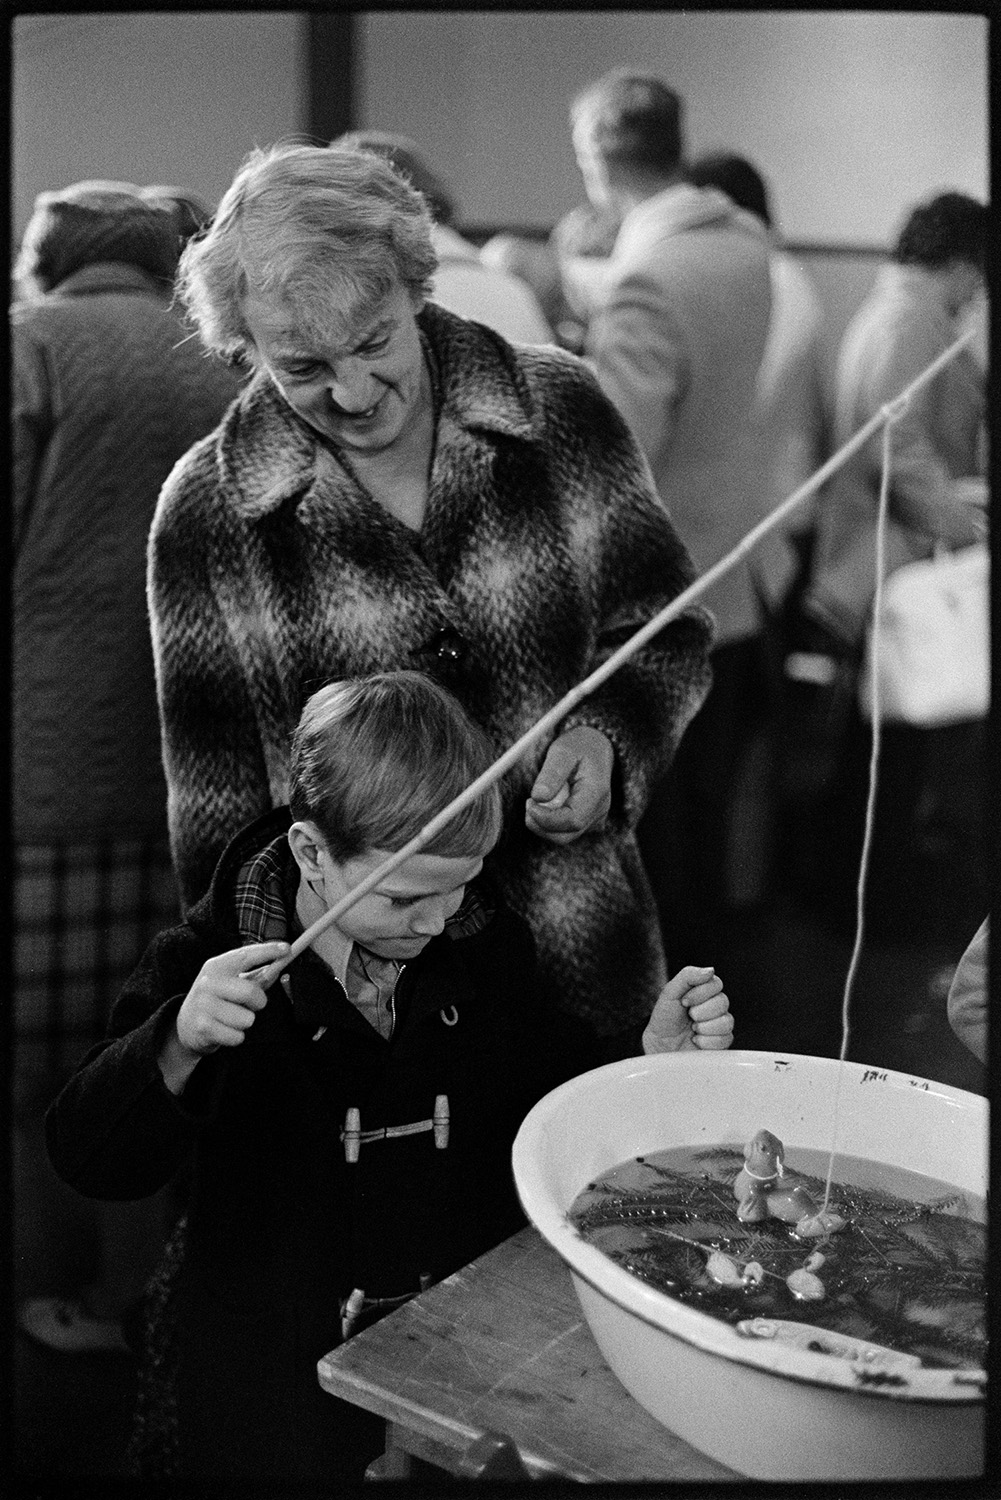 Christmas sale in village hall games and jumble.
[A woman watching a young boy playing a fishing game at a Christmas sale in Dolton Village Hall. Other people at the sale can be seen in the background.]